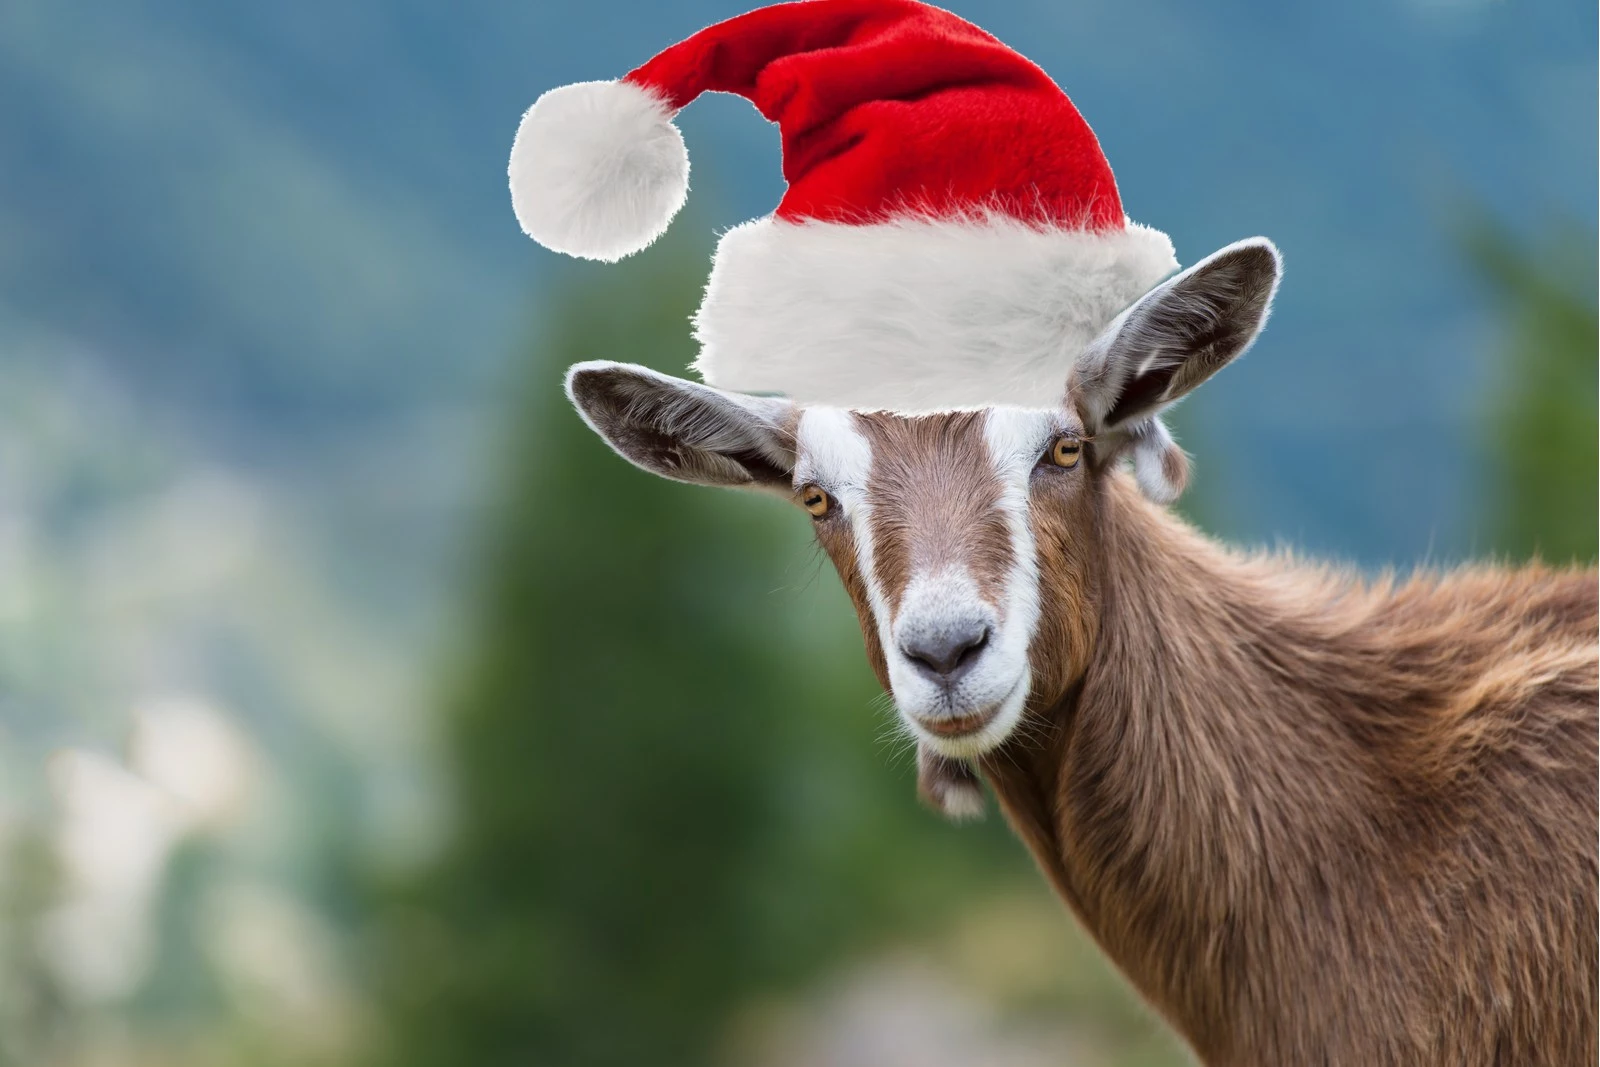 Bet You Don't Know About the Yule Goat Christmas Tradition!